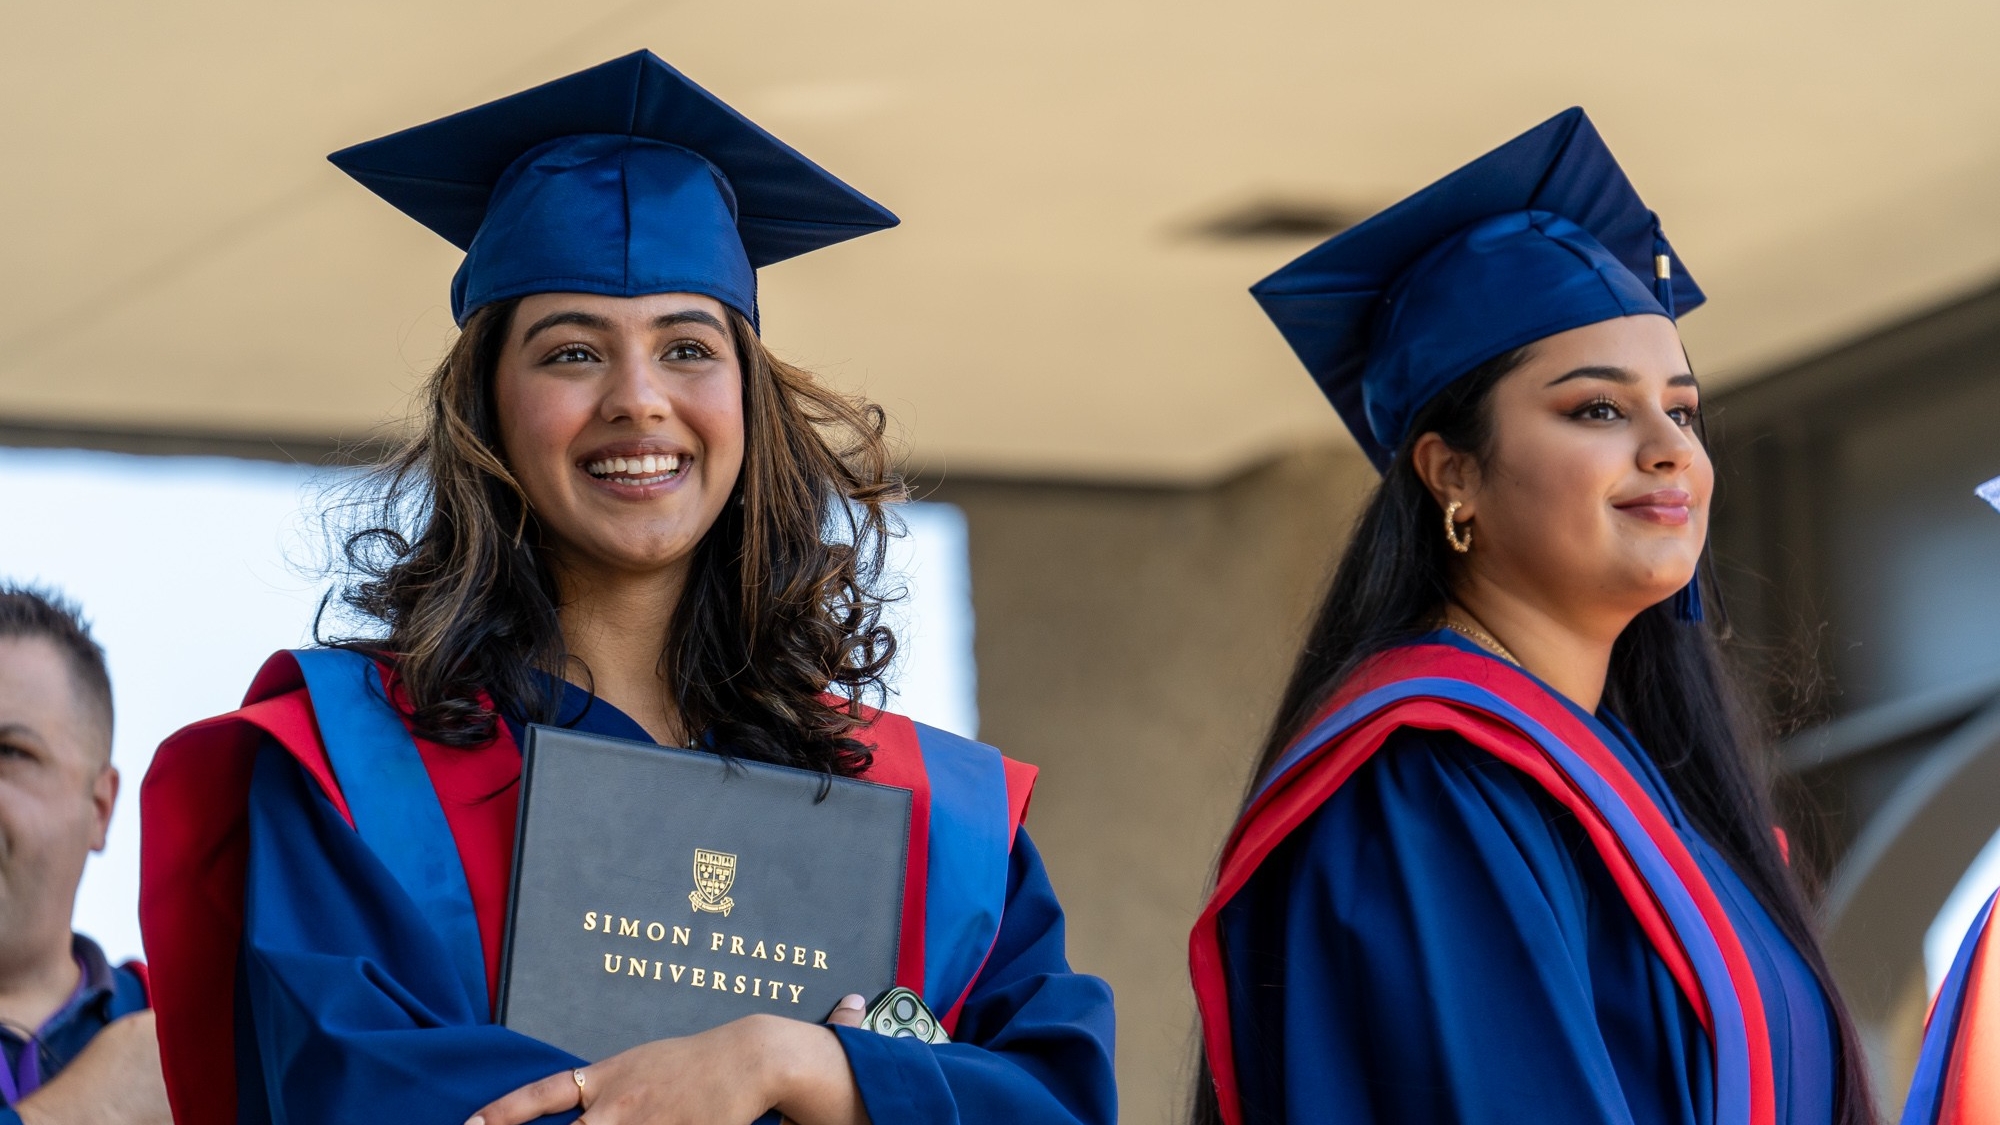 Two FASS graduates in the Convocation line up. The grad to the left is smiling and holding their parchment. The other grad to the right smiles off into the distance.